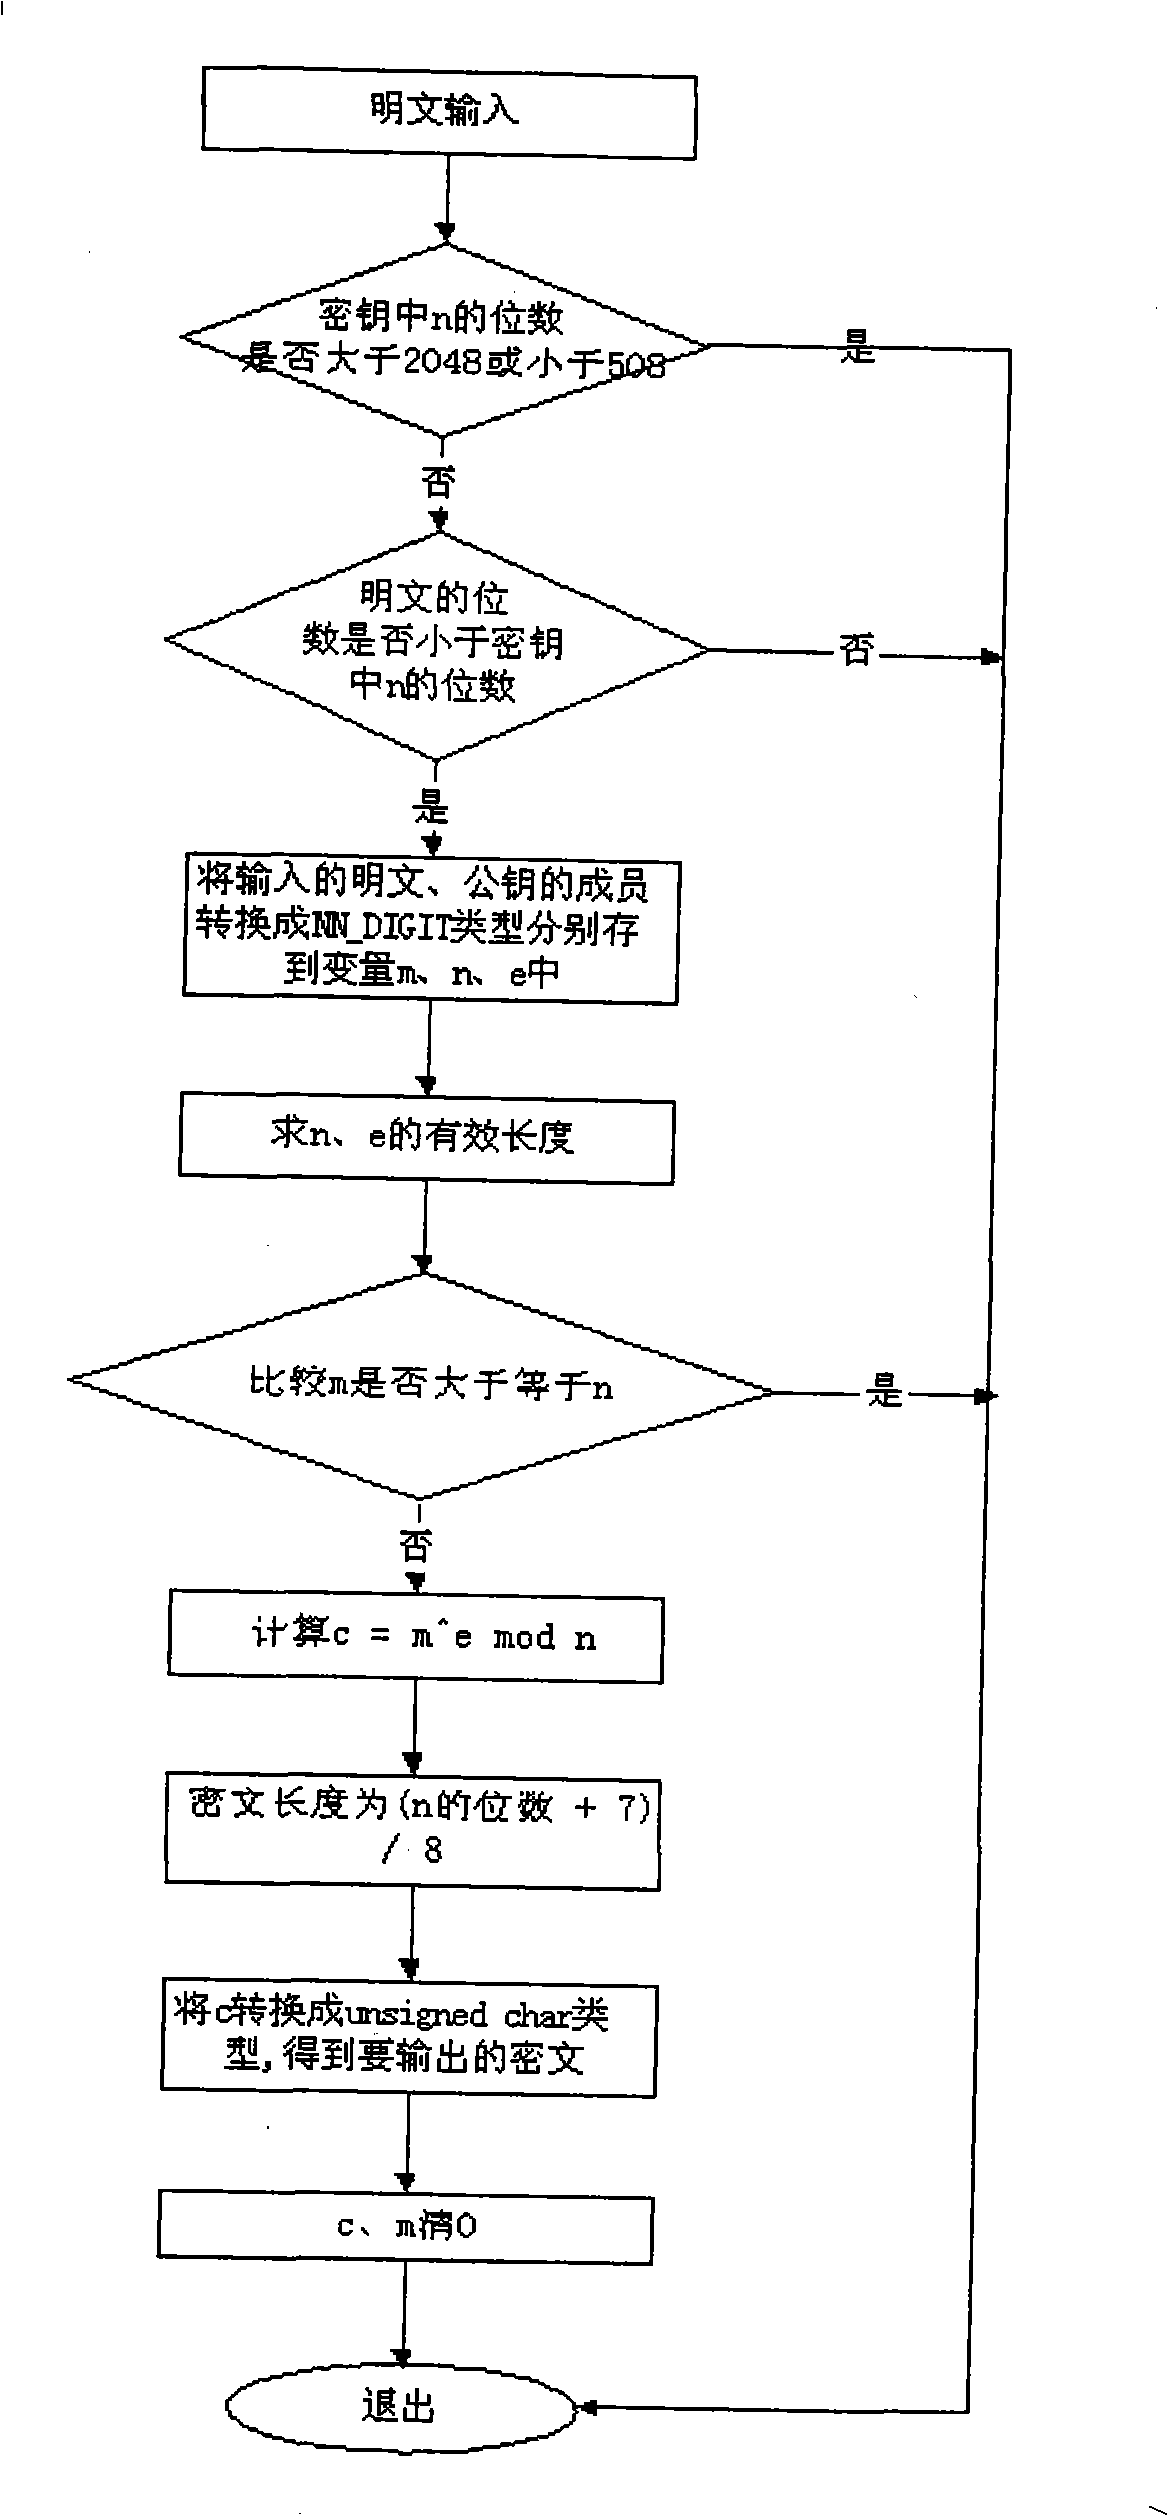 A mixed encryption method in session system